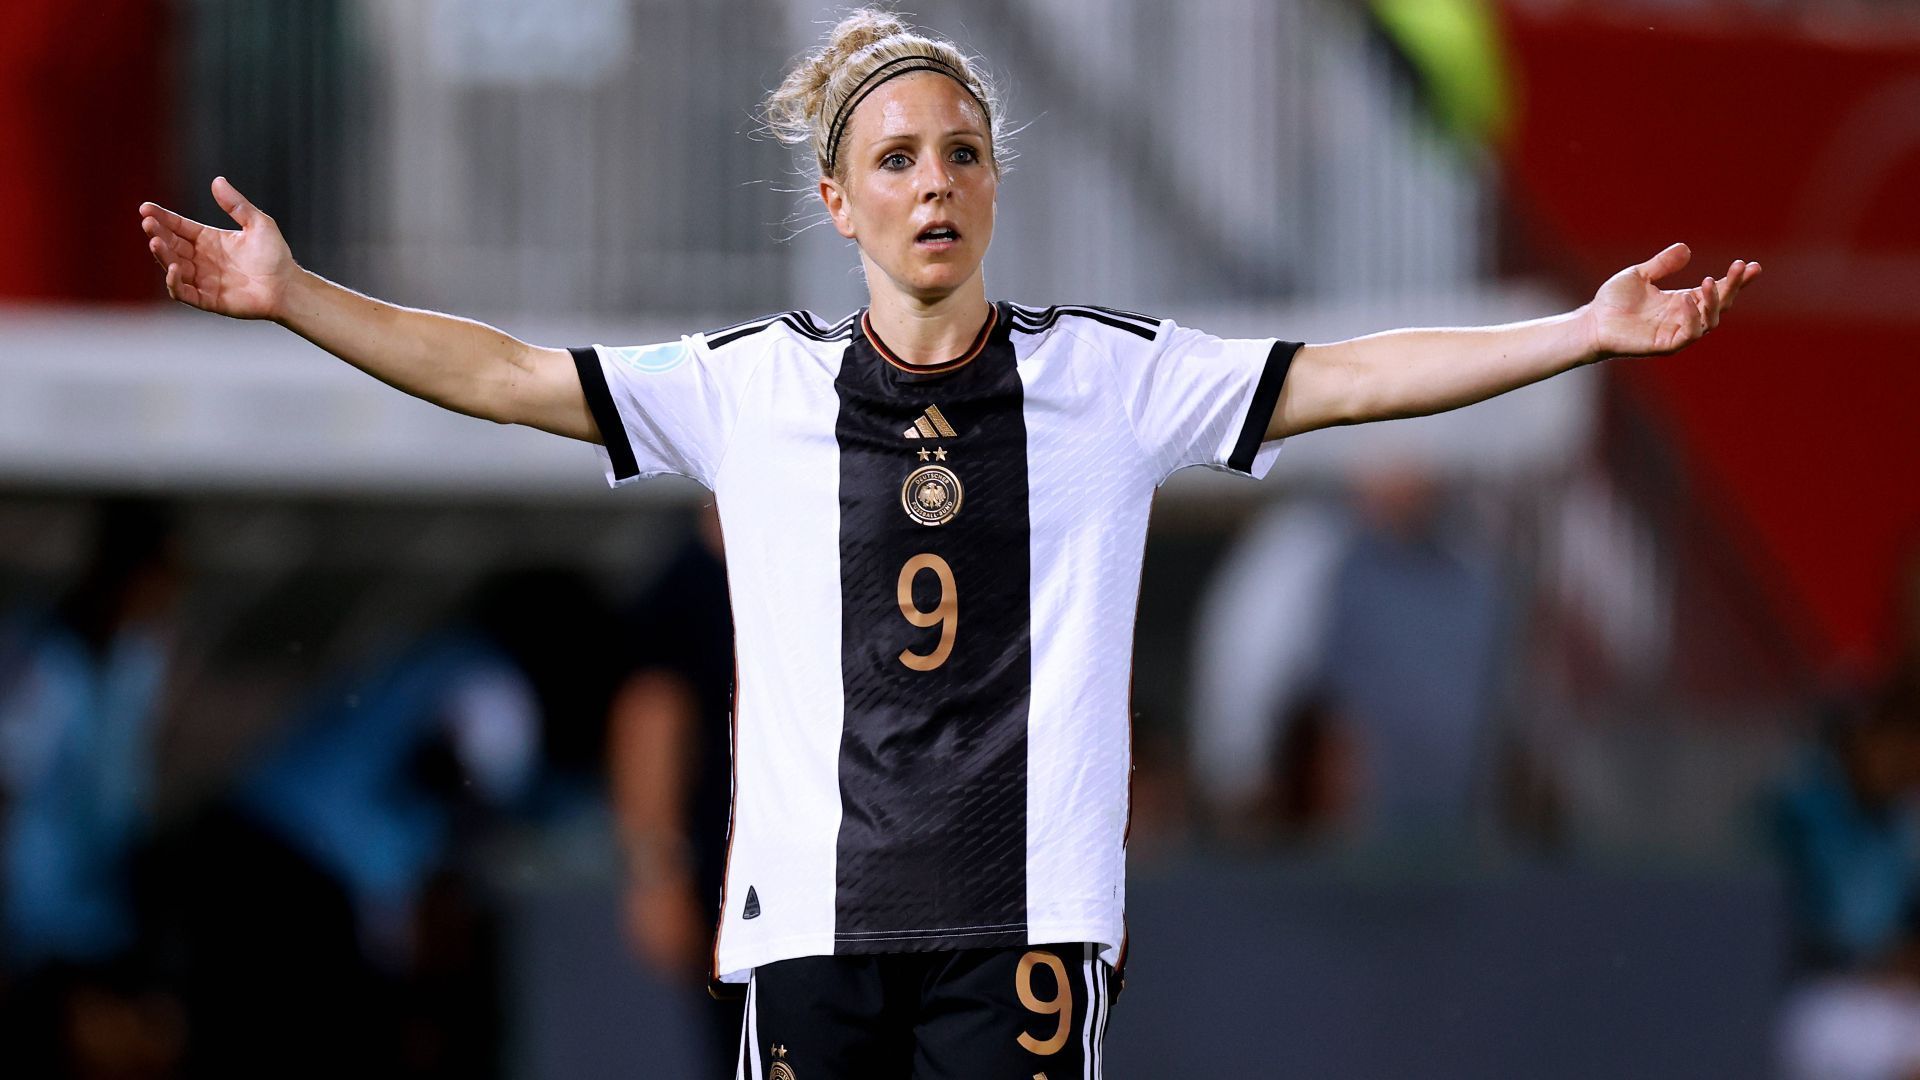 
                <strong>Svenja Huth</strong><br>
                &#x2022; <strong>Position: </strong>Mittelfeld/Angriff<br>&#x2022; <strong>Verein: </strong>VfL Wolfsburg<br>&#x2022; <strong>Trikotnummer: </strong><br>&#x2022; <strong>Alter: </strong><br>&#x2022; <strong>Länderspiele: </strong><br>&#x2022; <strong>Länderspiel-Tore: </strong><br>
              